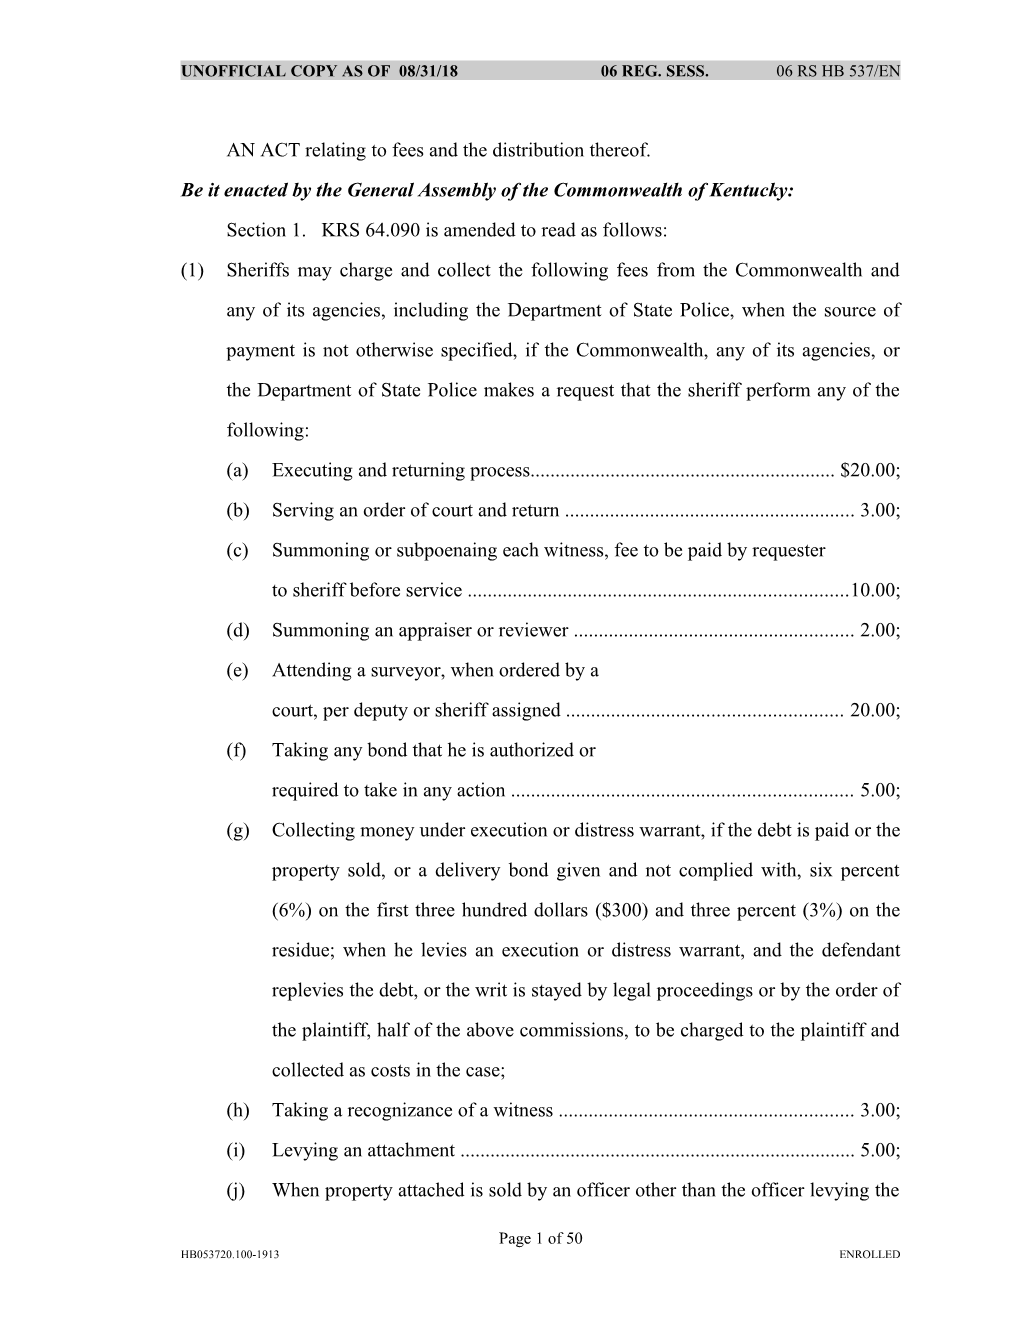 AN ACT Relating to Fees and the Distribution Thereof